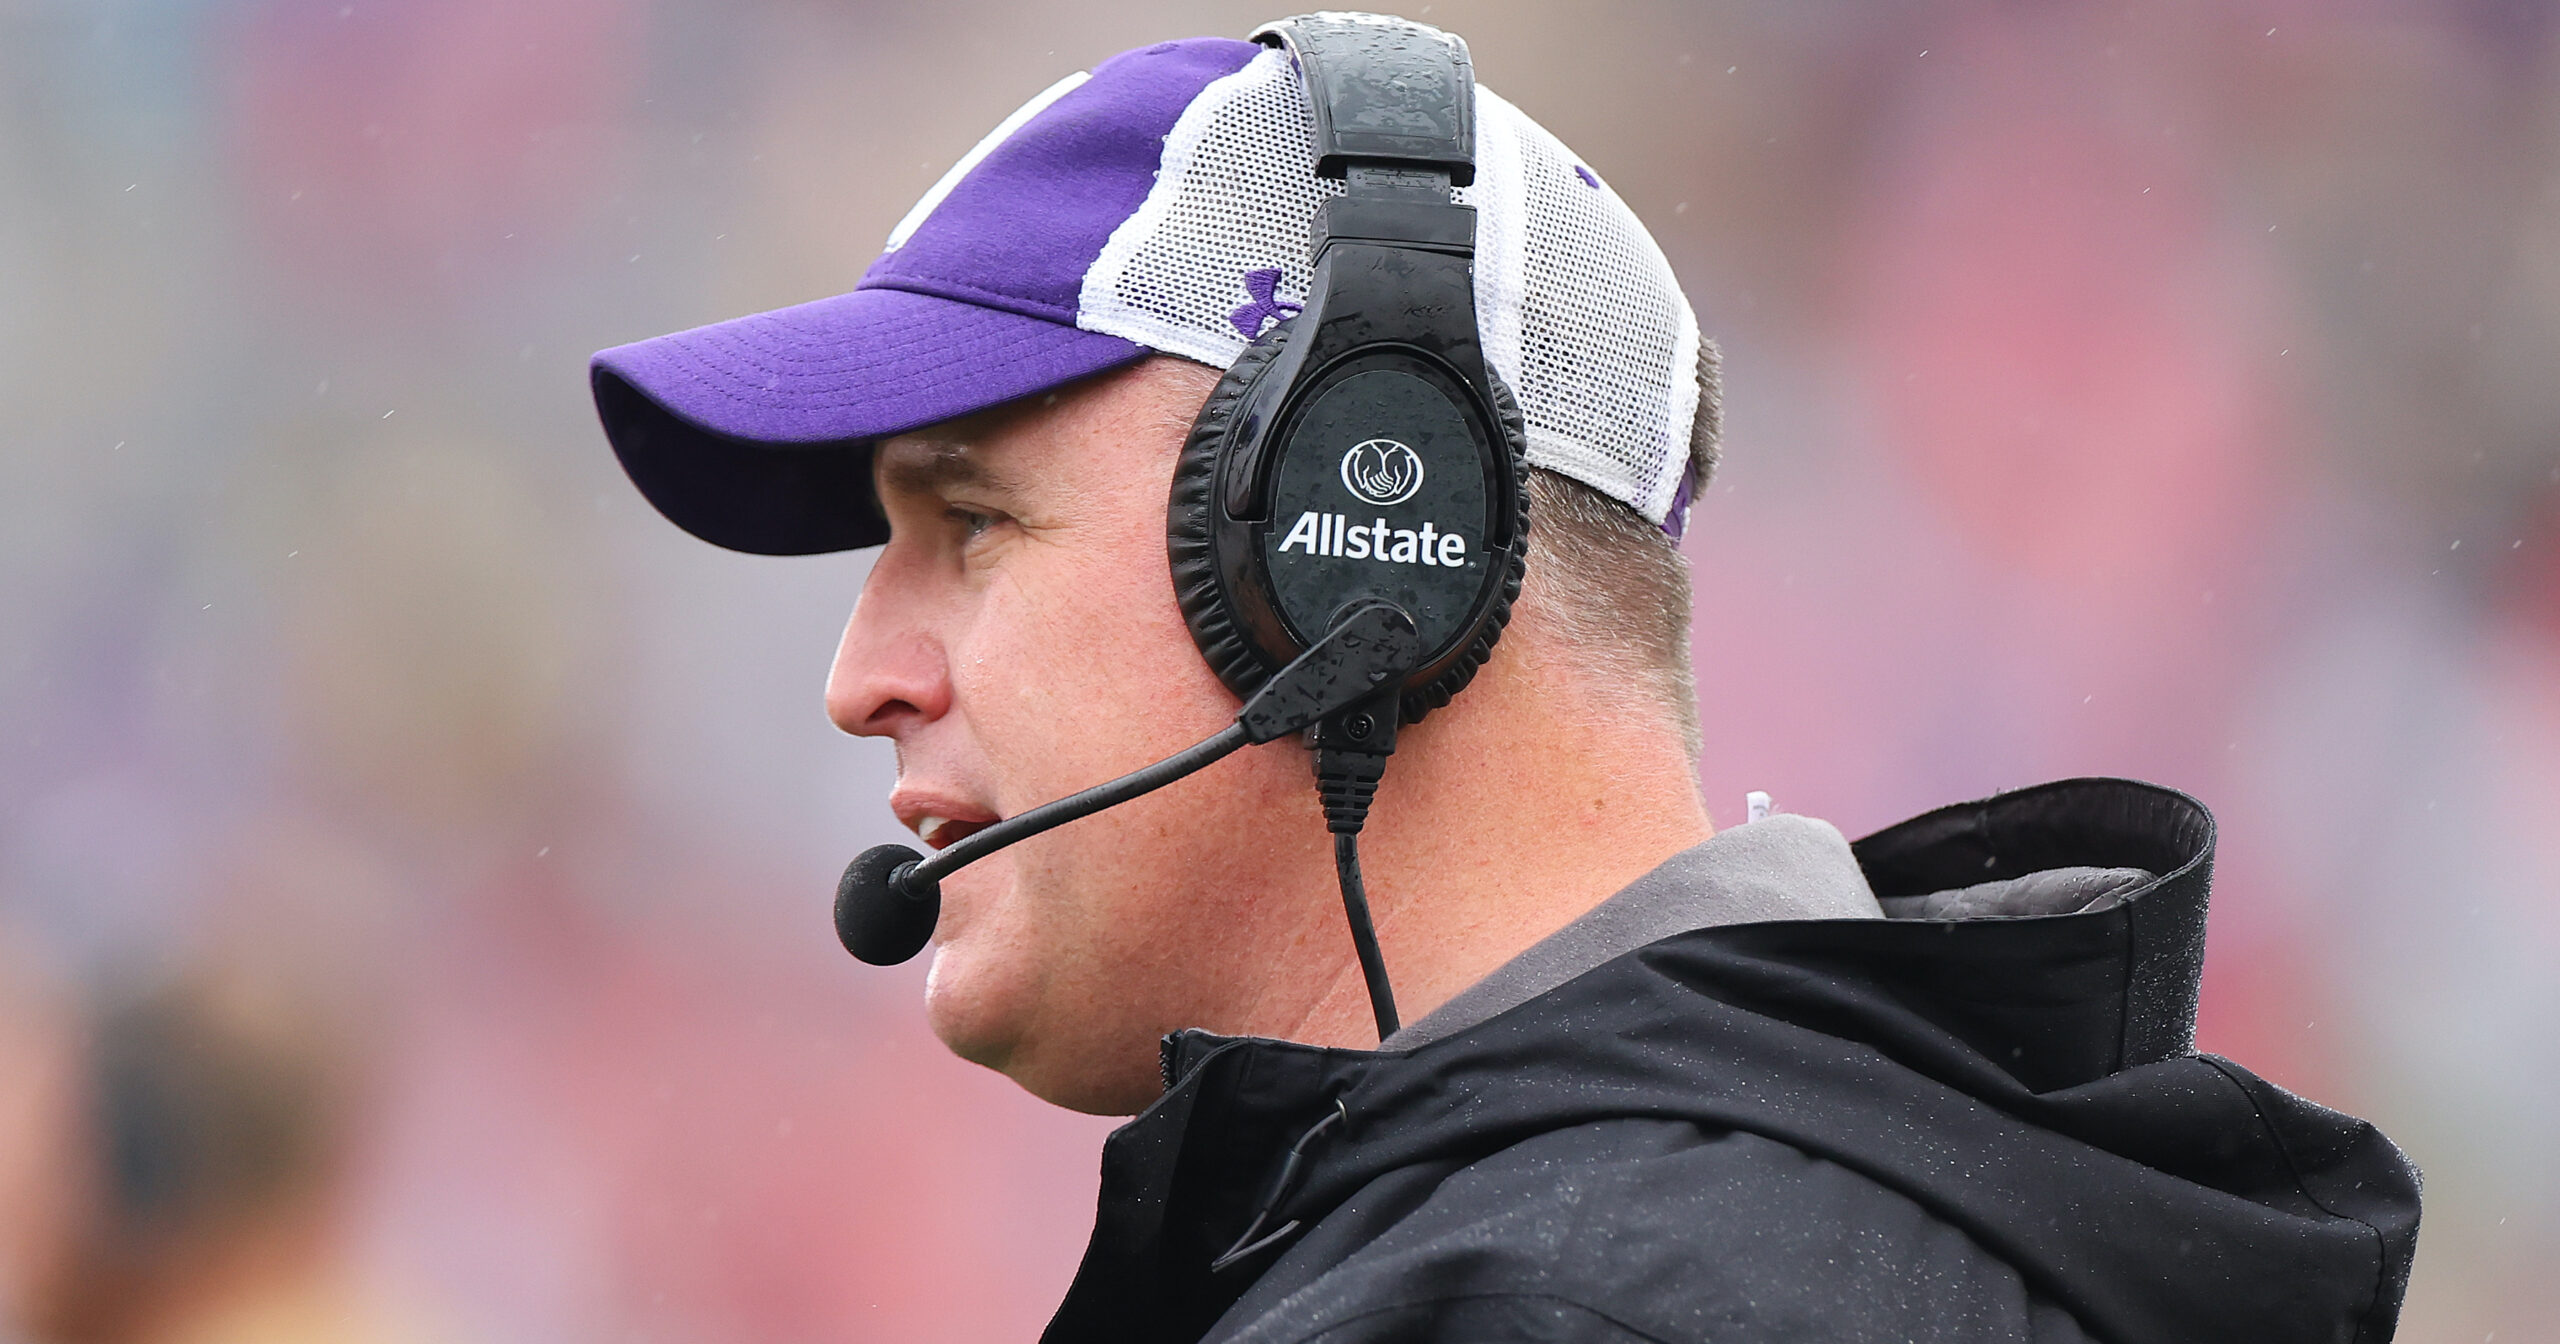 Pat Fitzgerald fired at Northwestern following hazing investigation photo